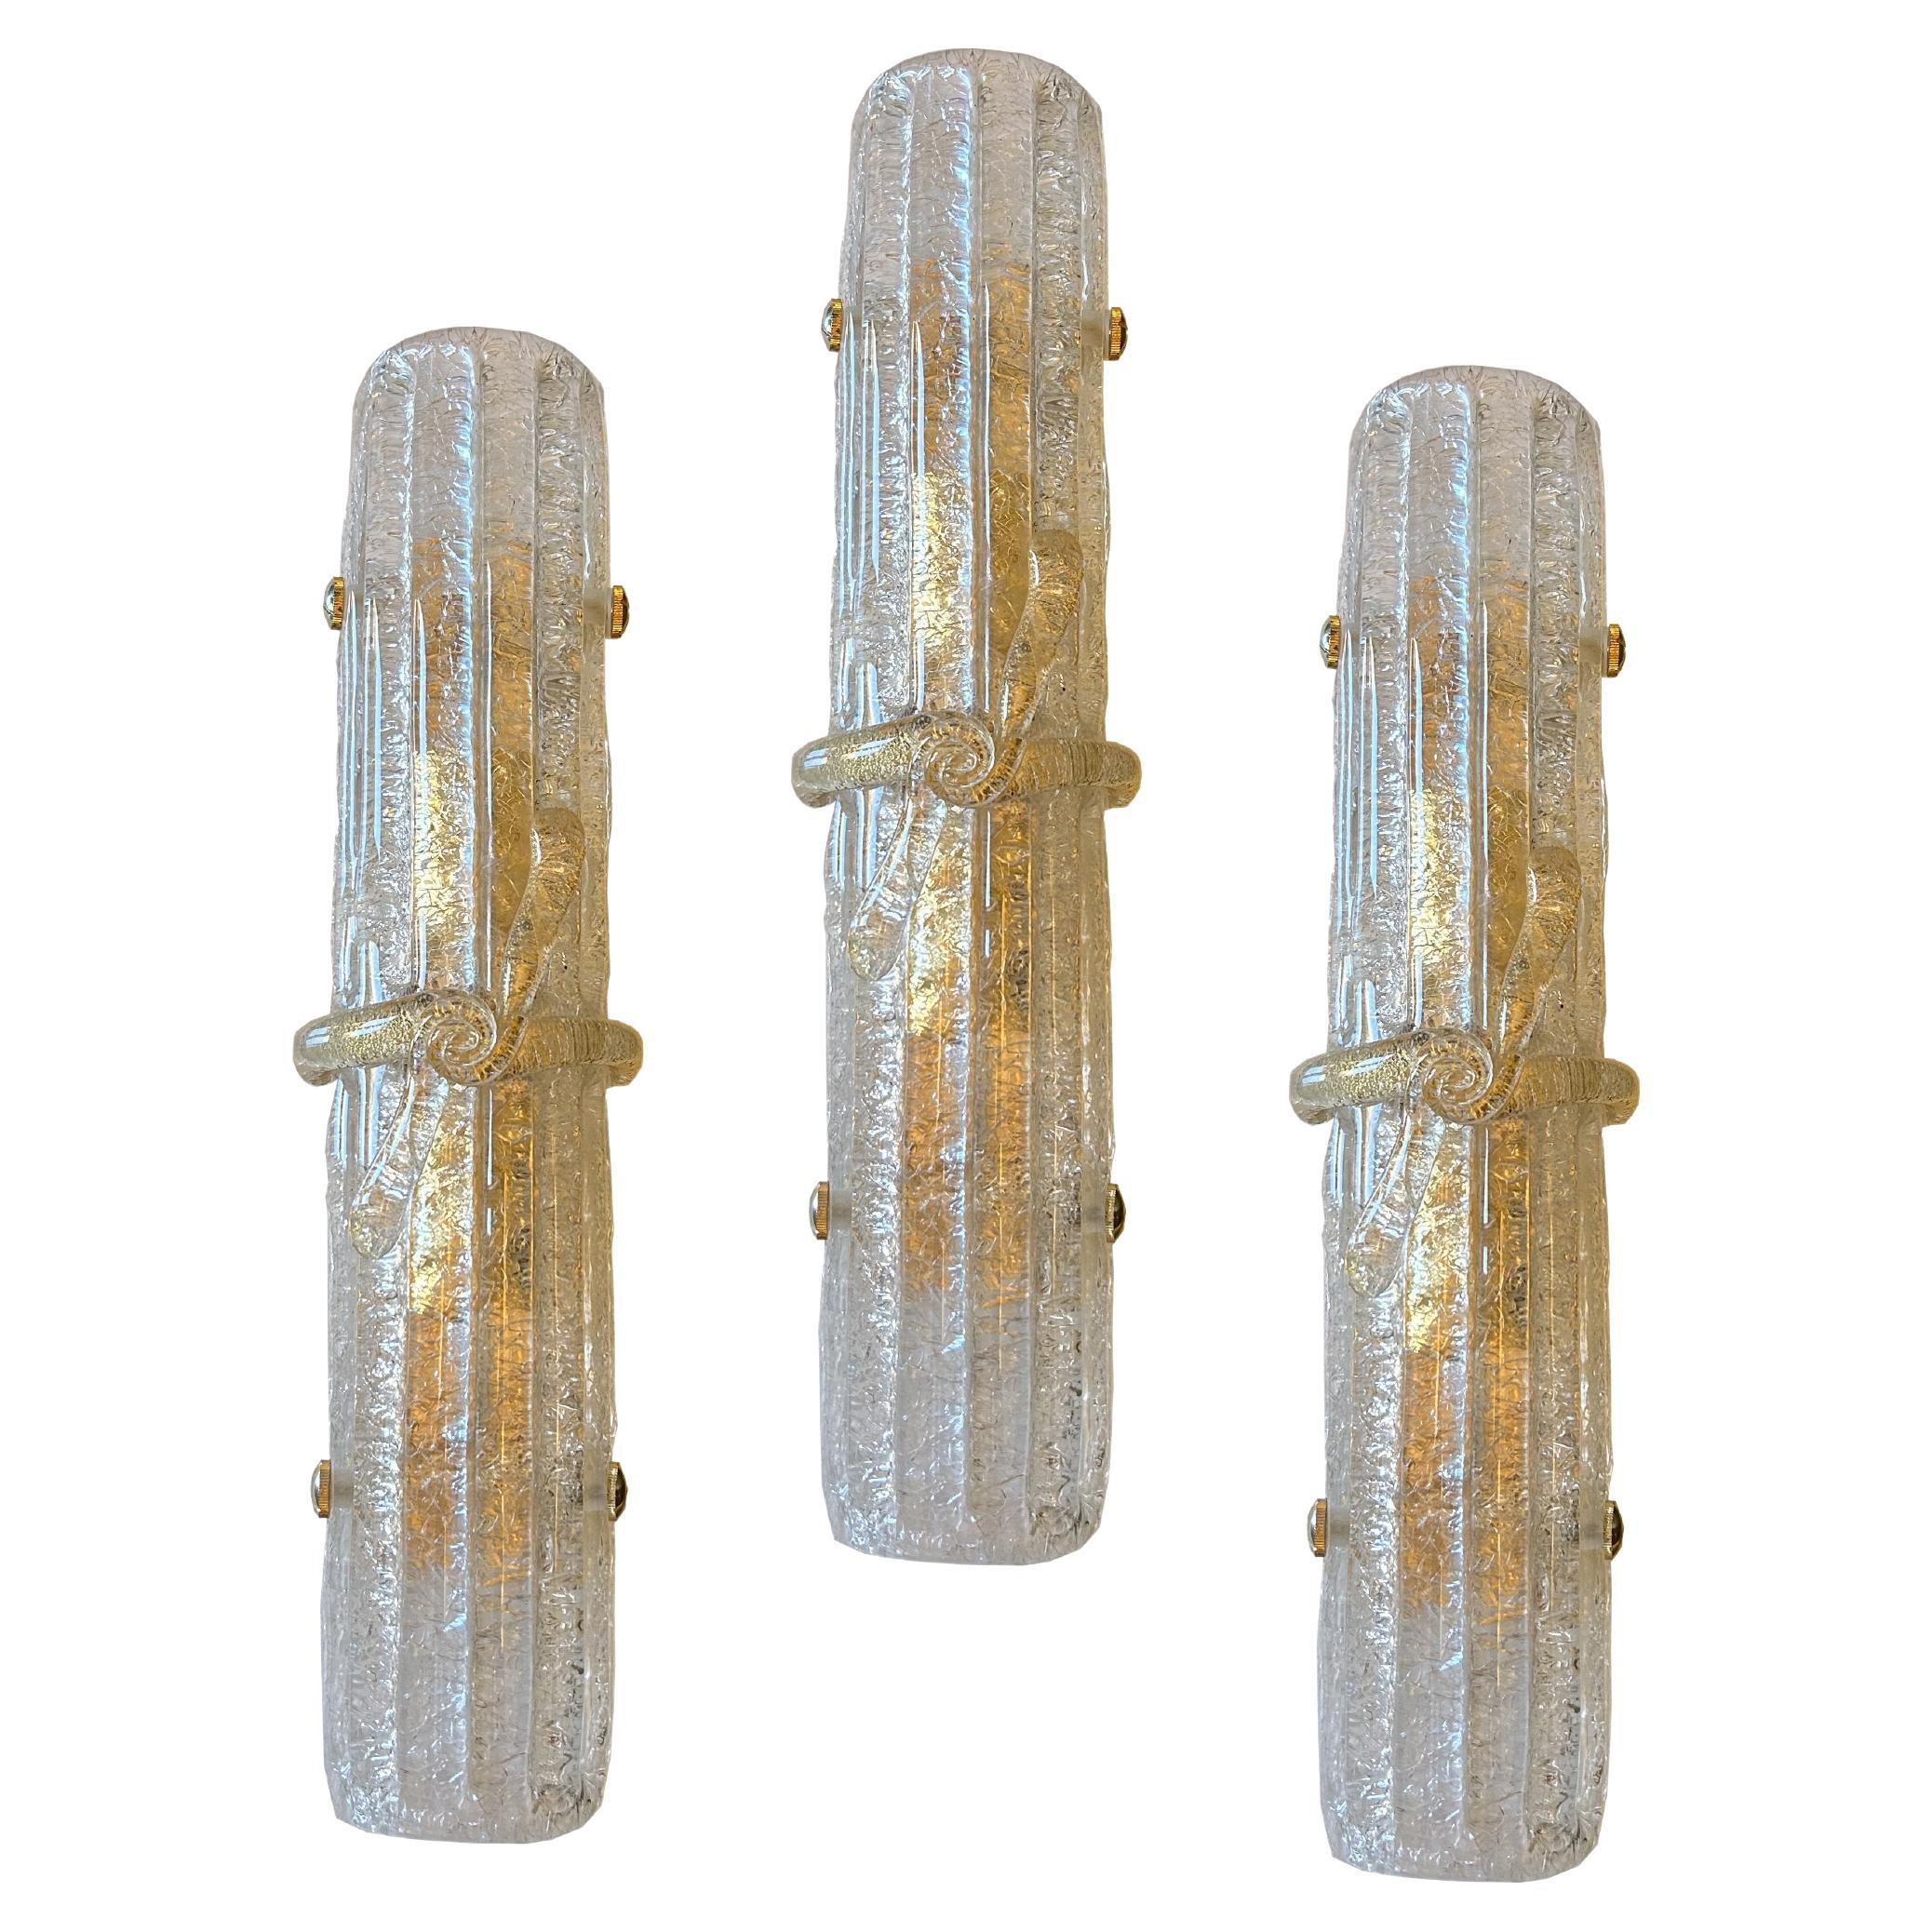 Set of Three Magnificent Murano Wall Lights, 1980's